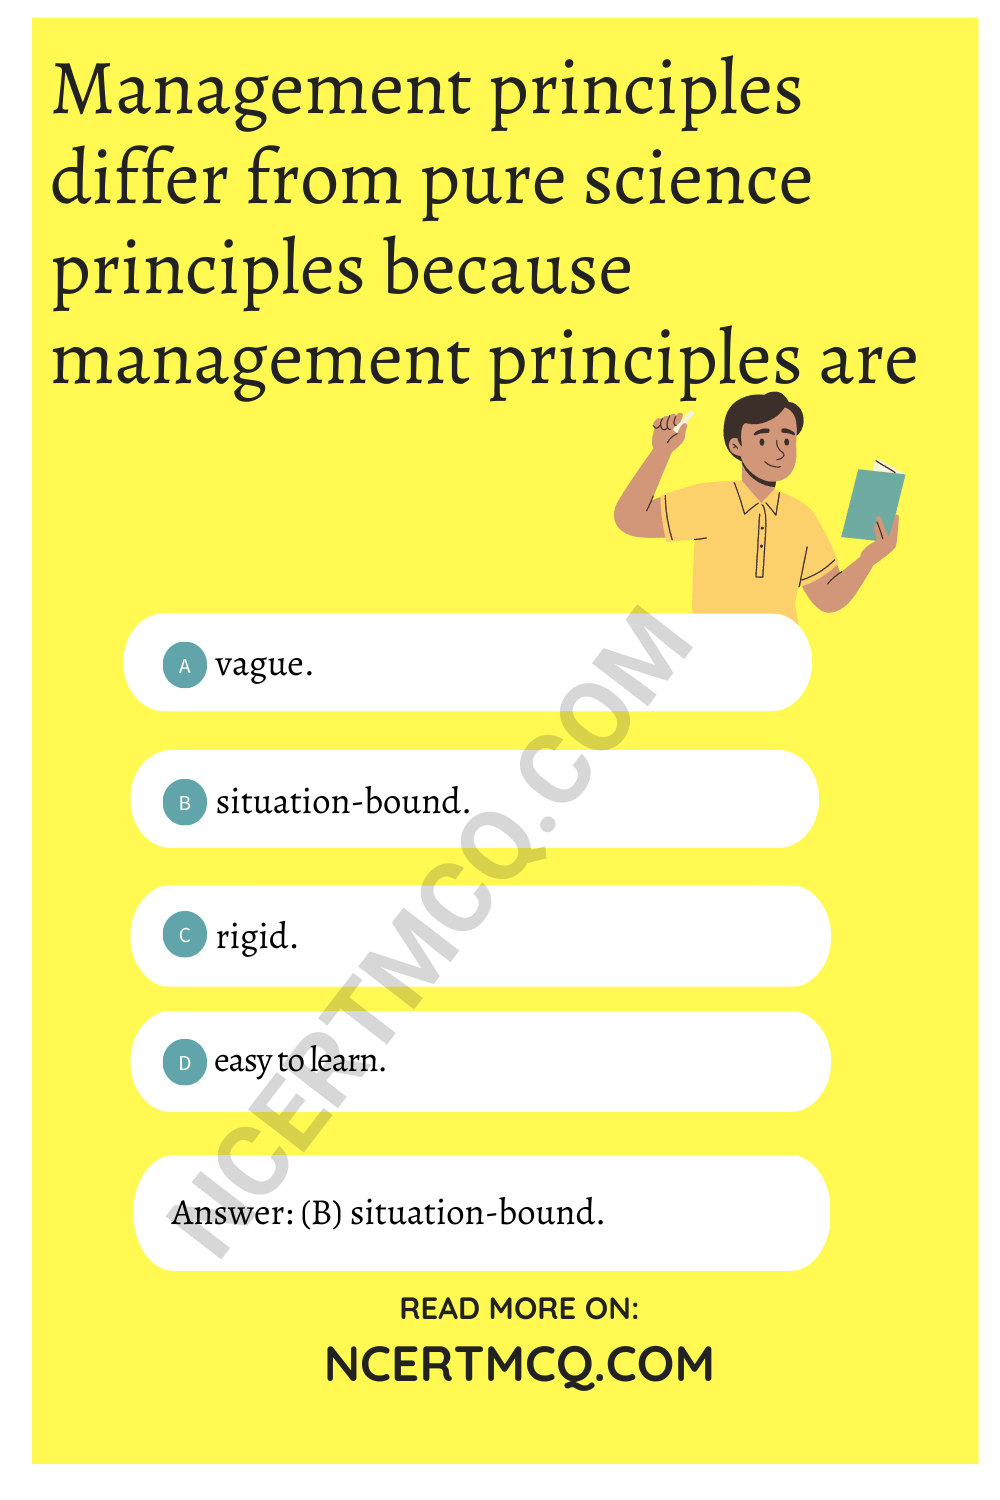 Management principles differ from pure science principles because management principles are